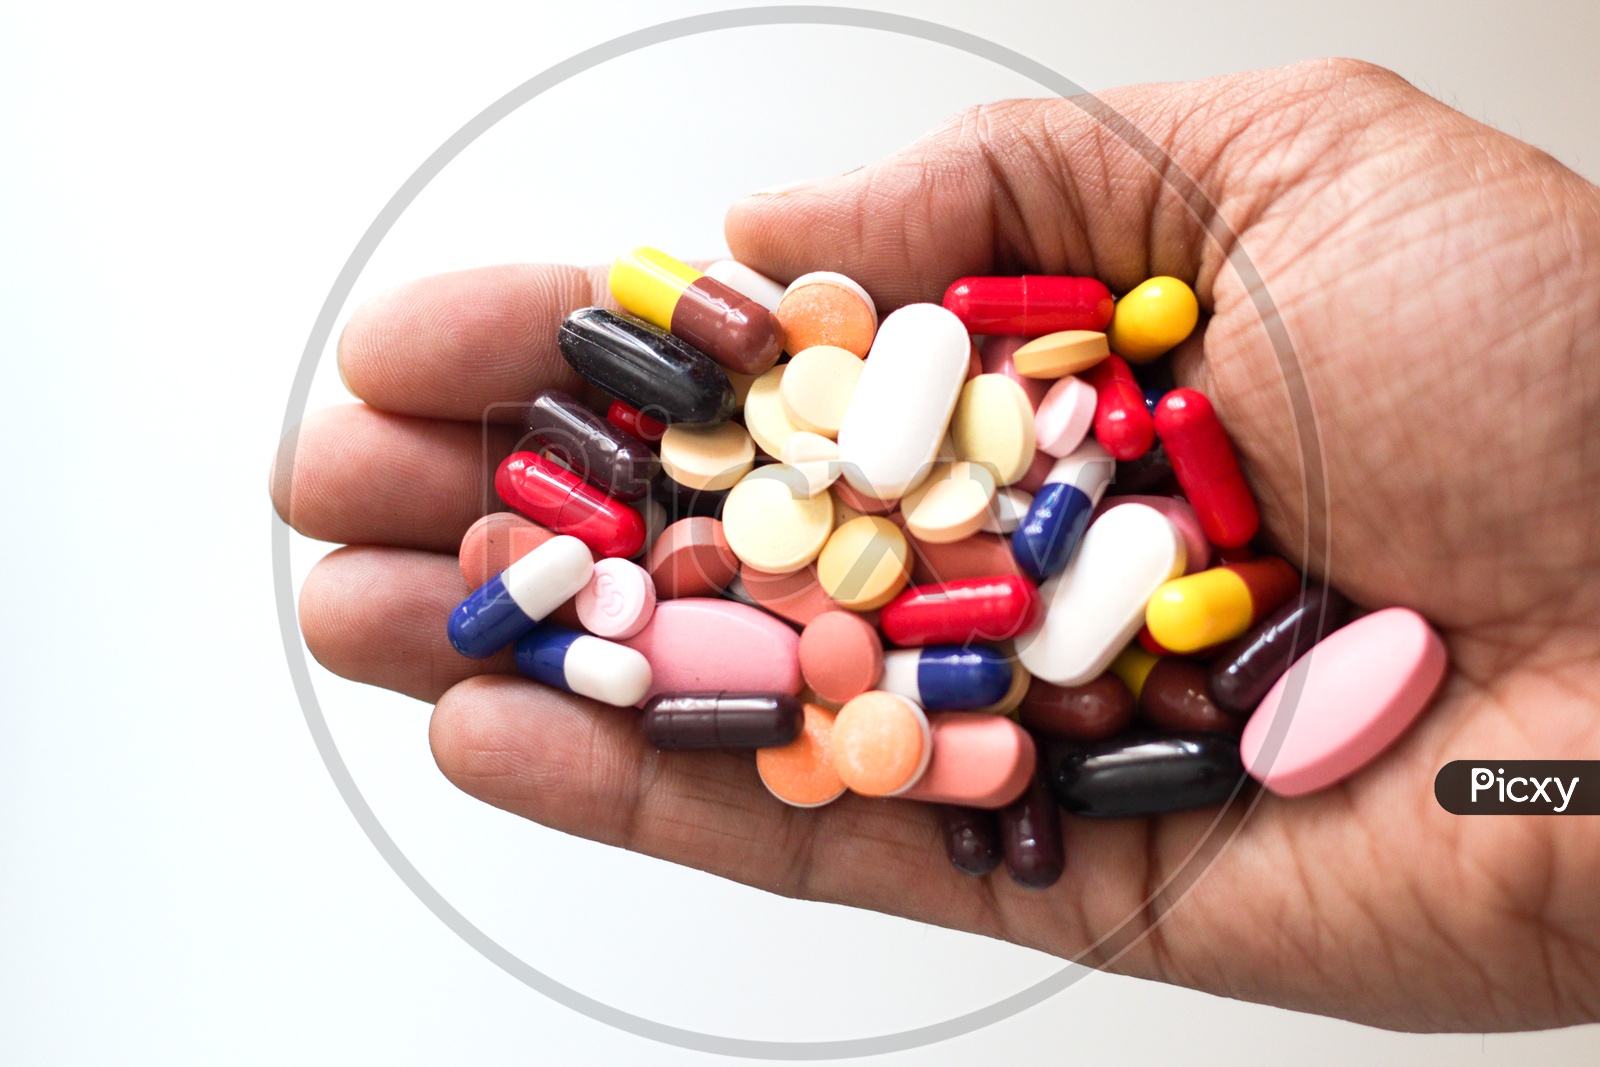 Pile Of Medicine Pills Tablets Capsules In A Palm In White Background